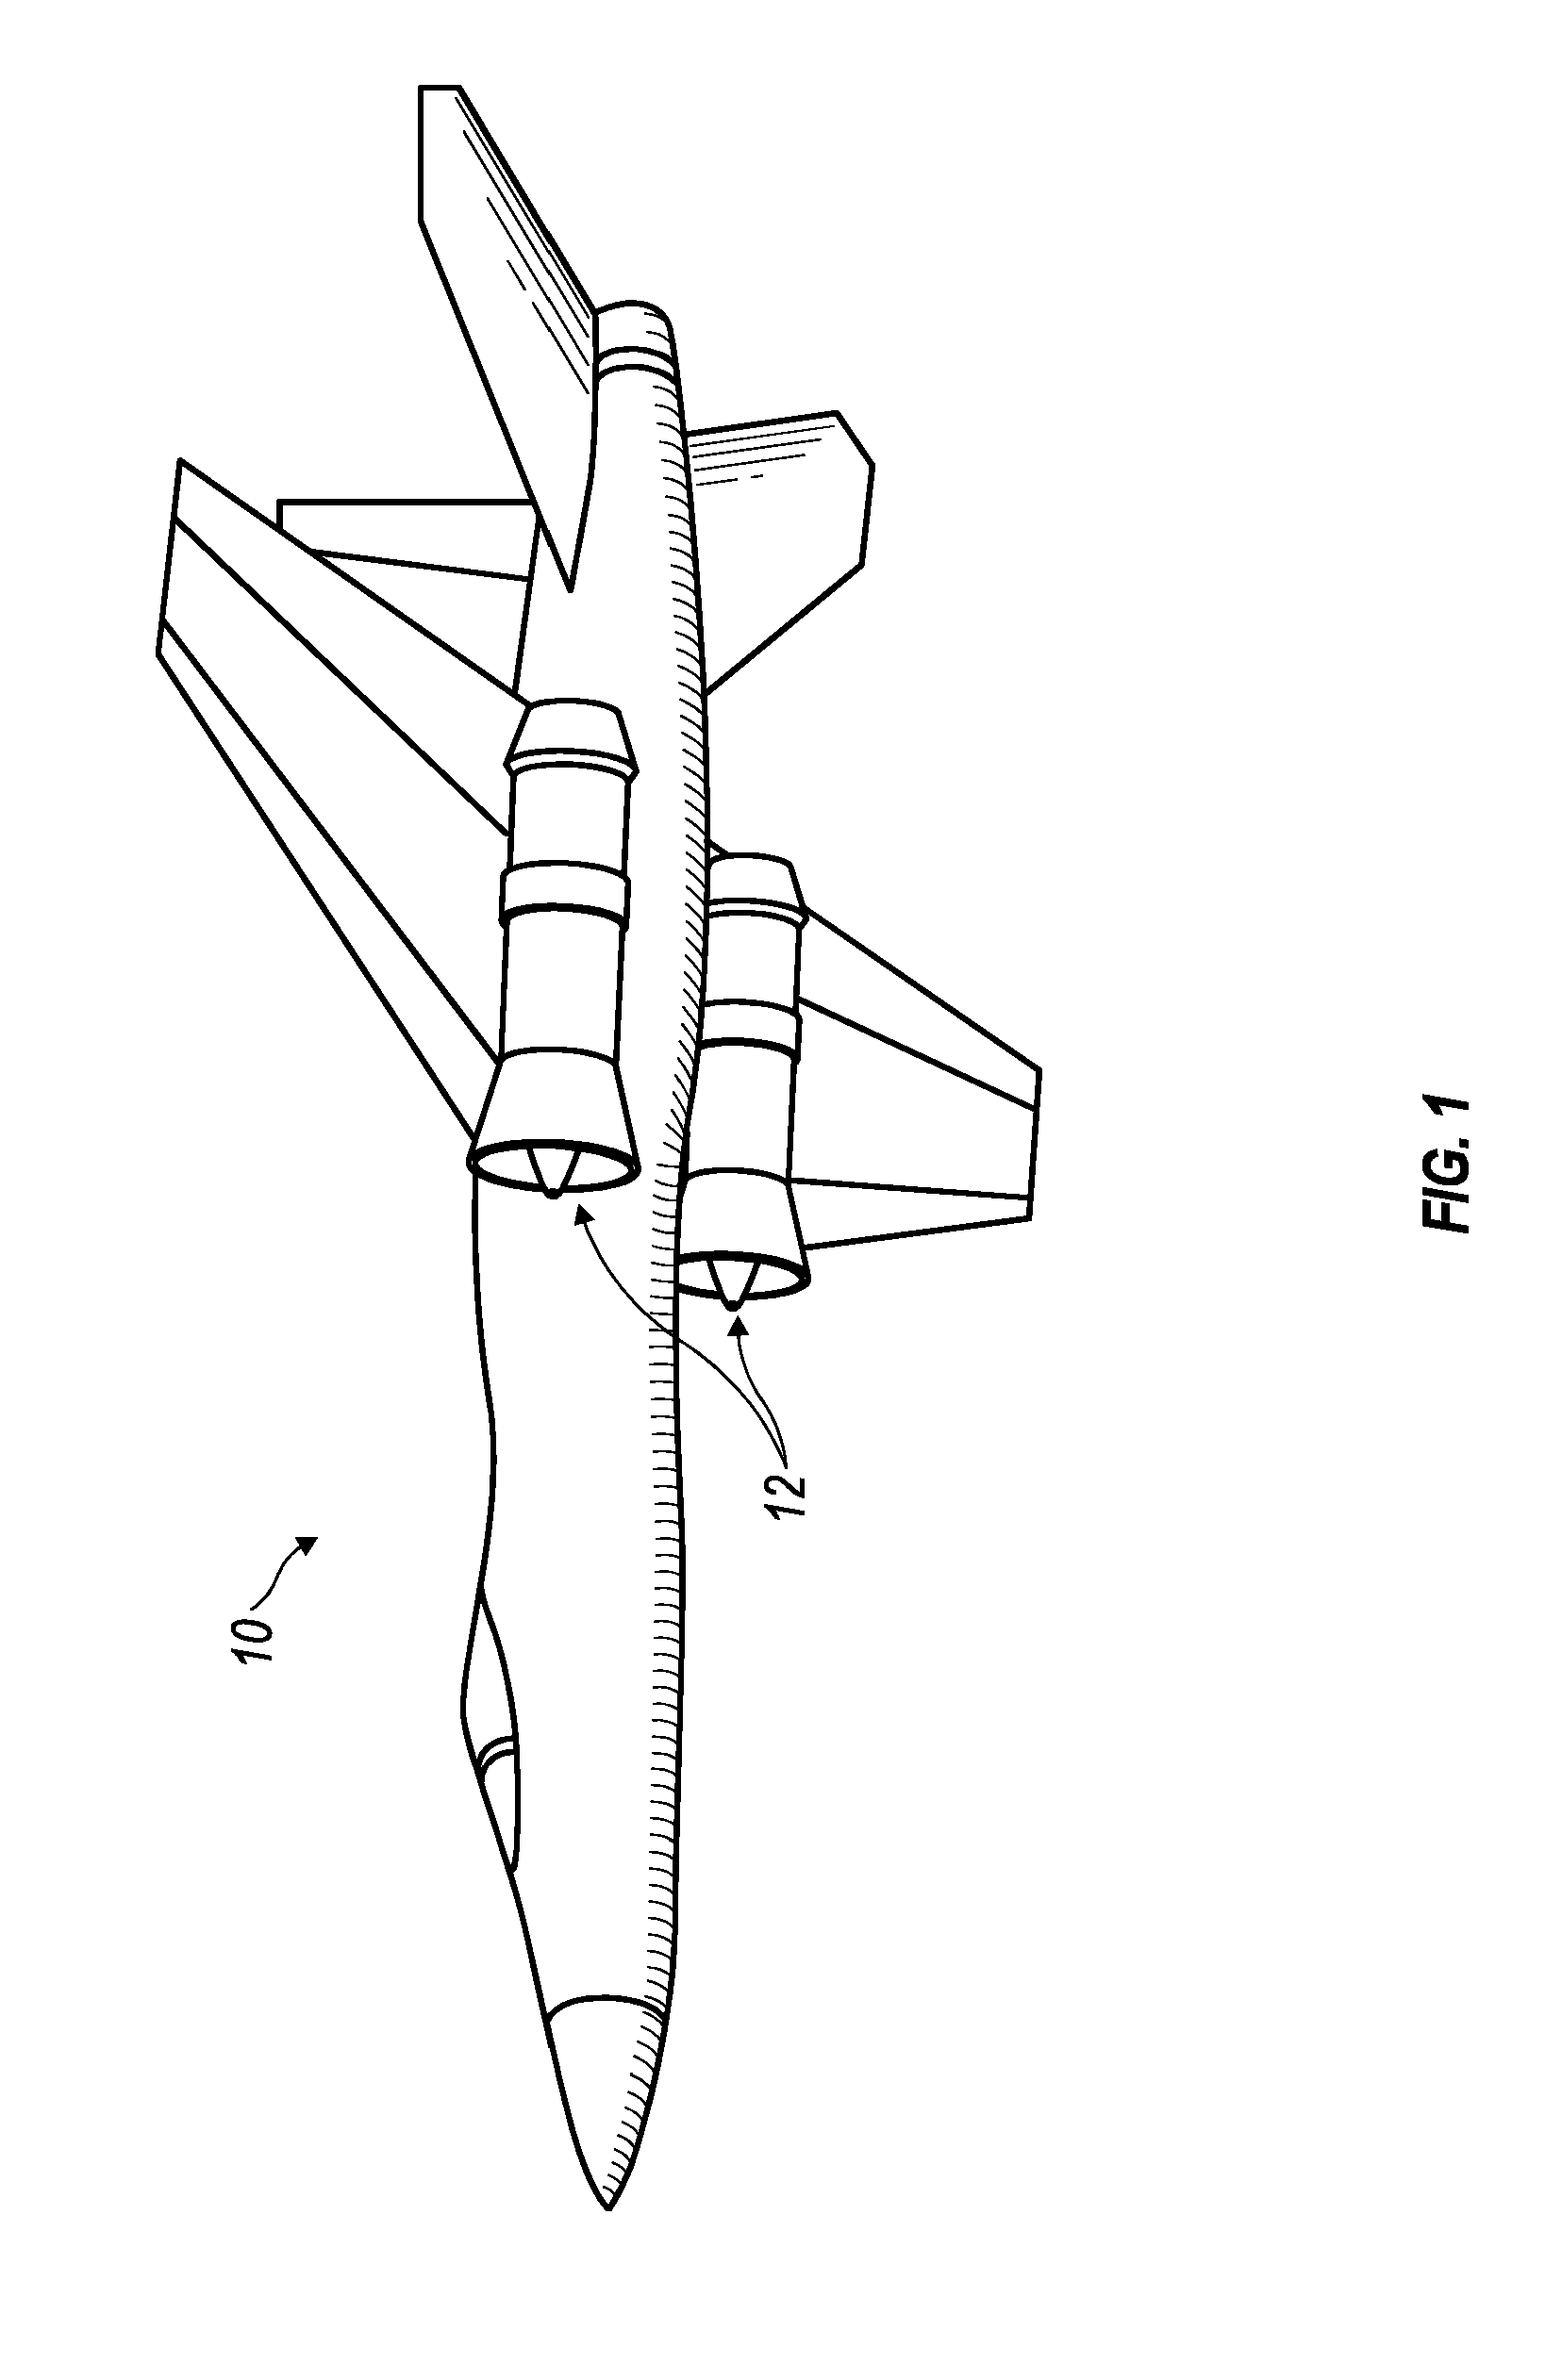 Method and apparatus for providing an afterburner fuel-feed arrangement